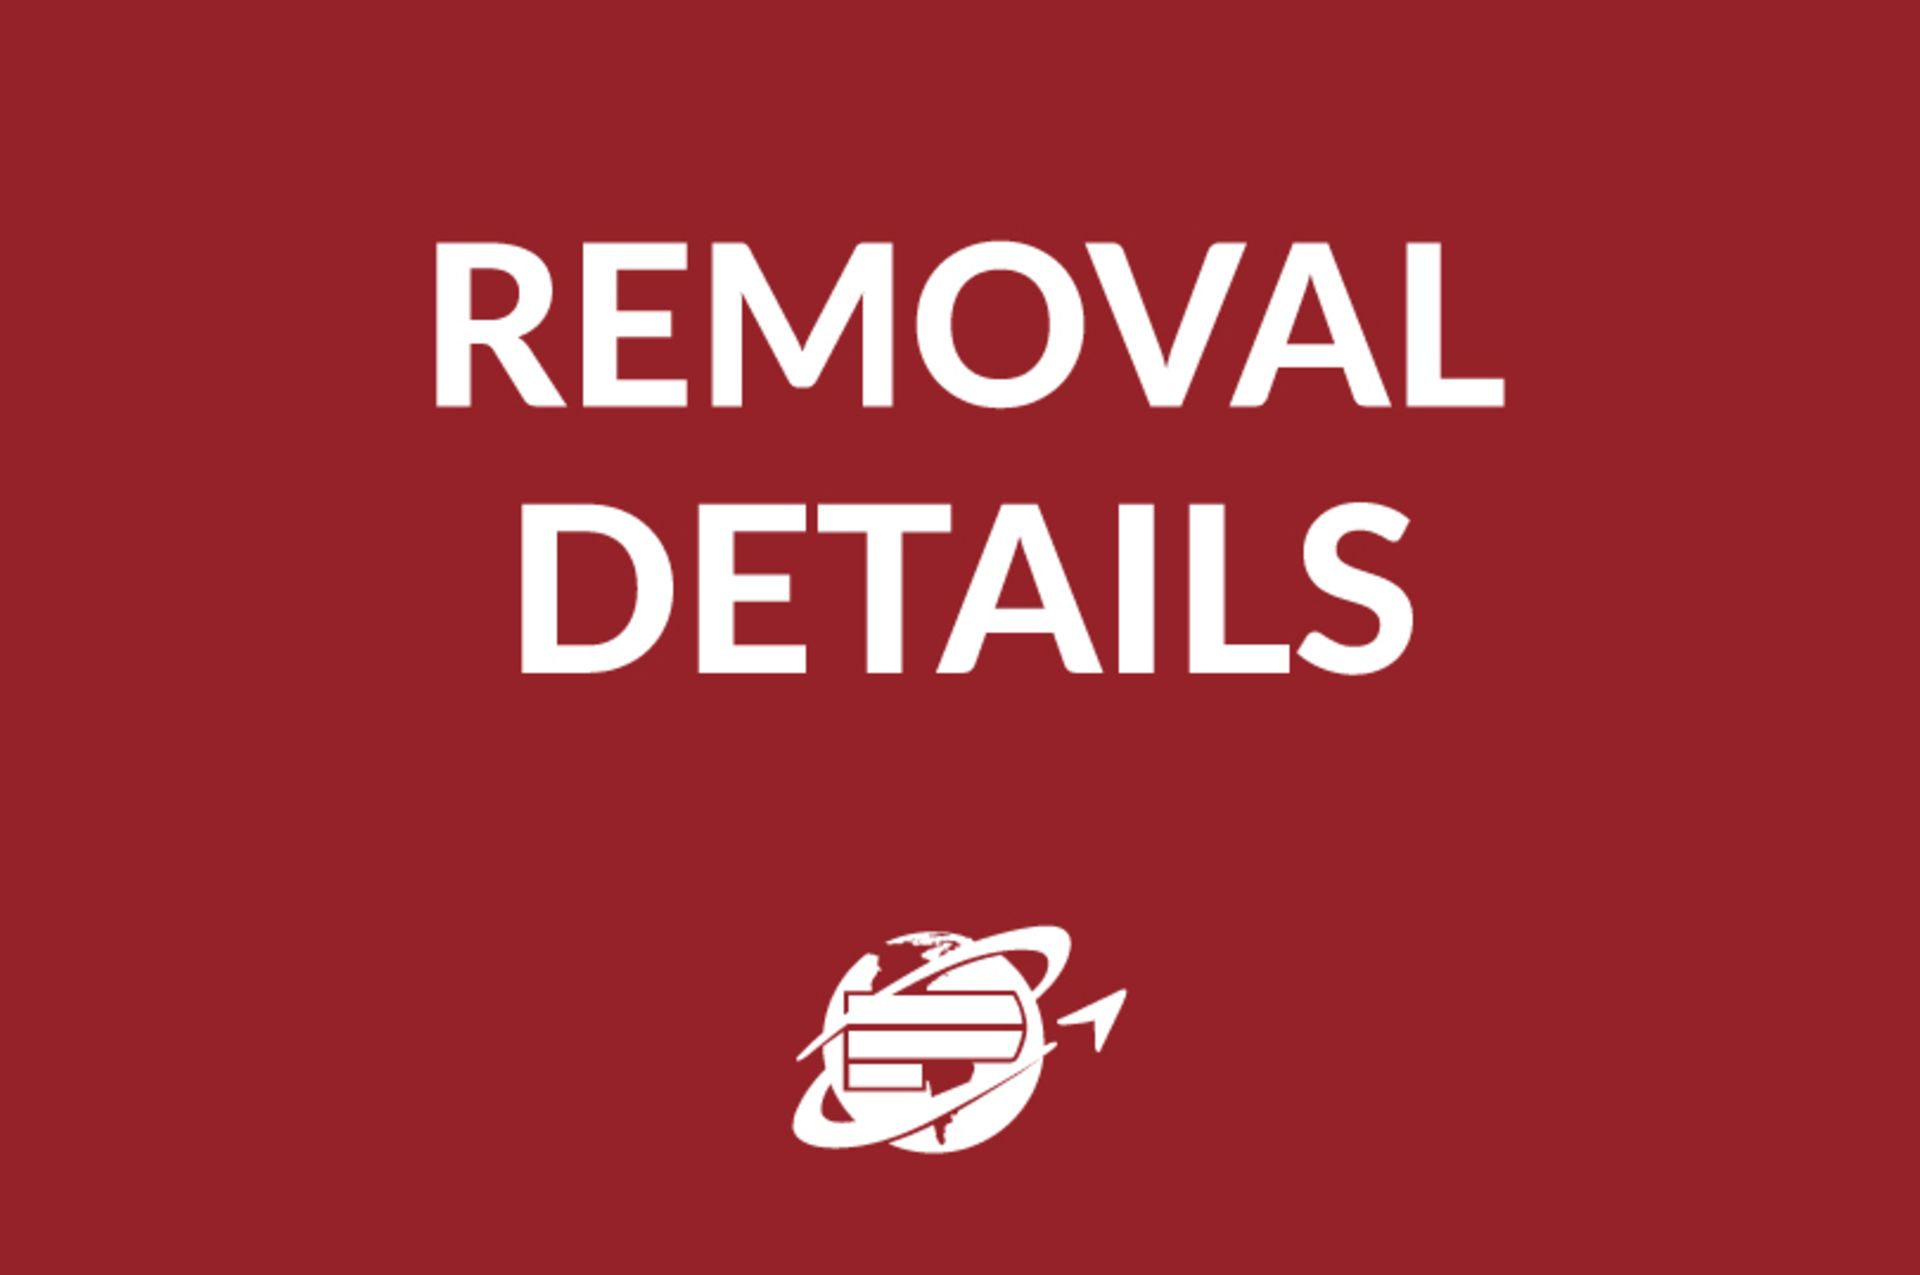 All items must be removed no later than Friday, February 16. All removal is strictly on an appointme